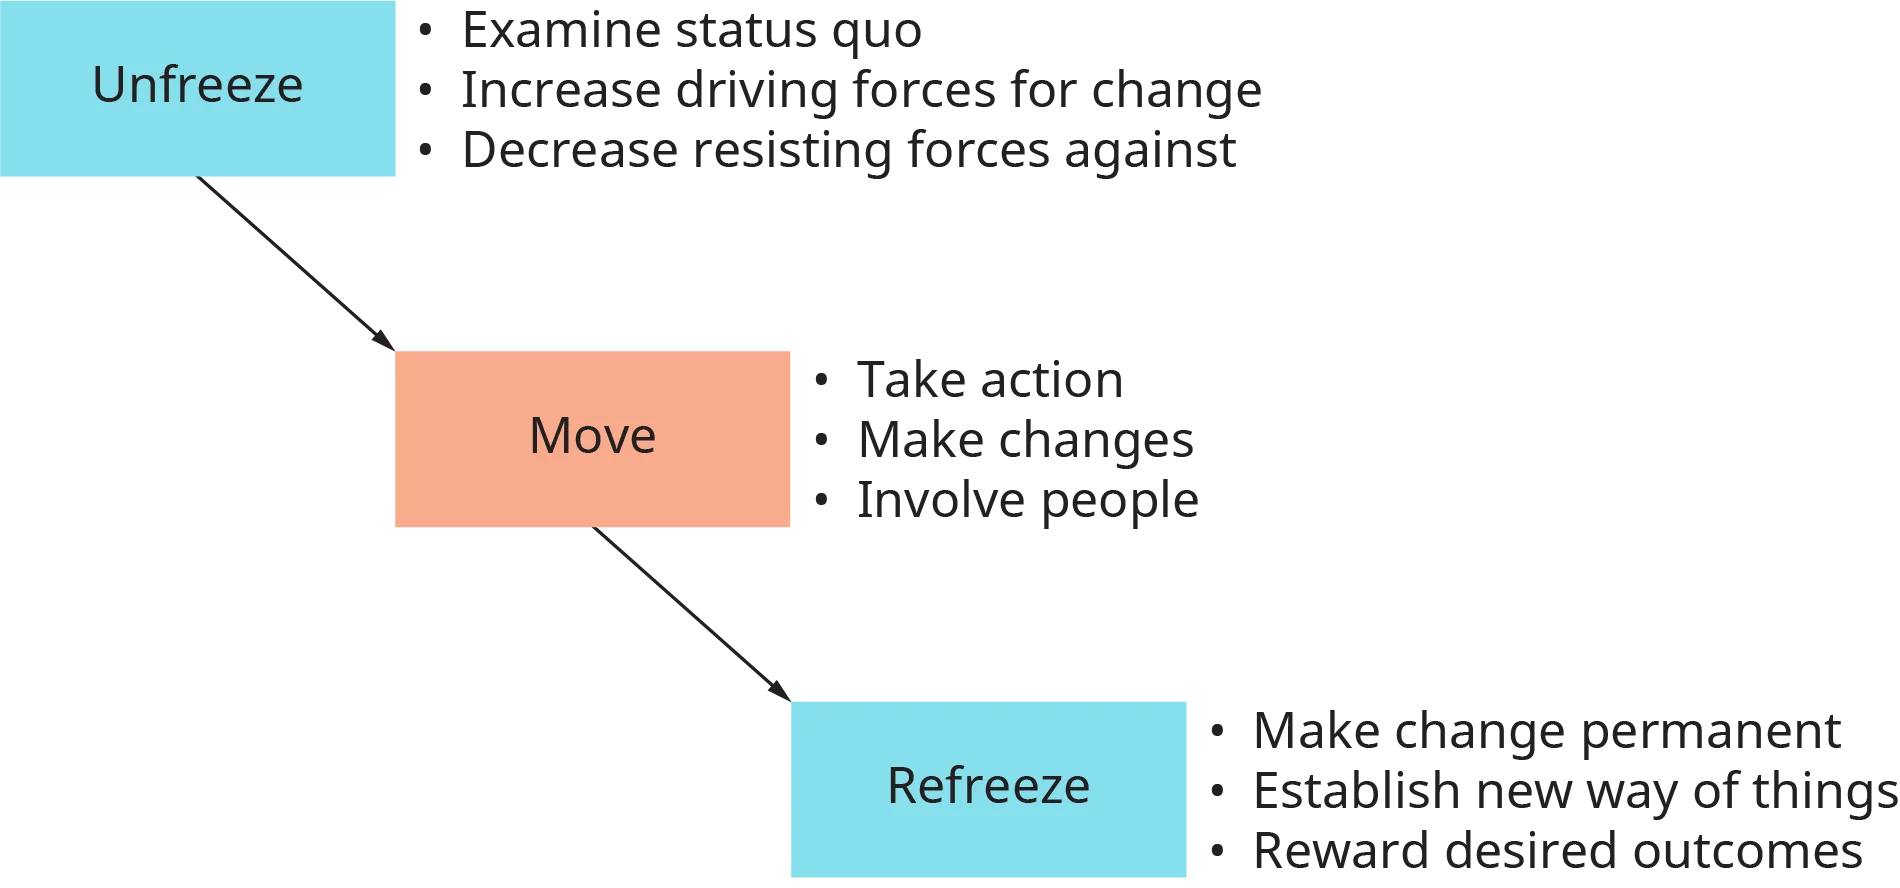 A diagram shows Lewin’s Change Model with organizational changes occurring in three phases.